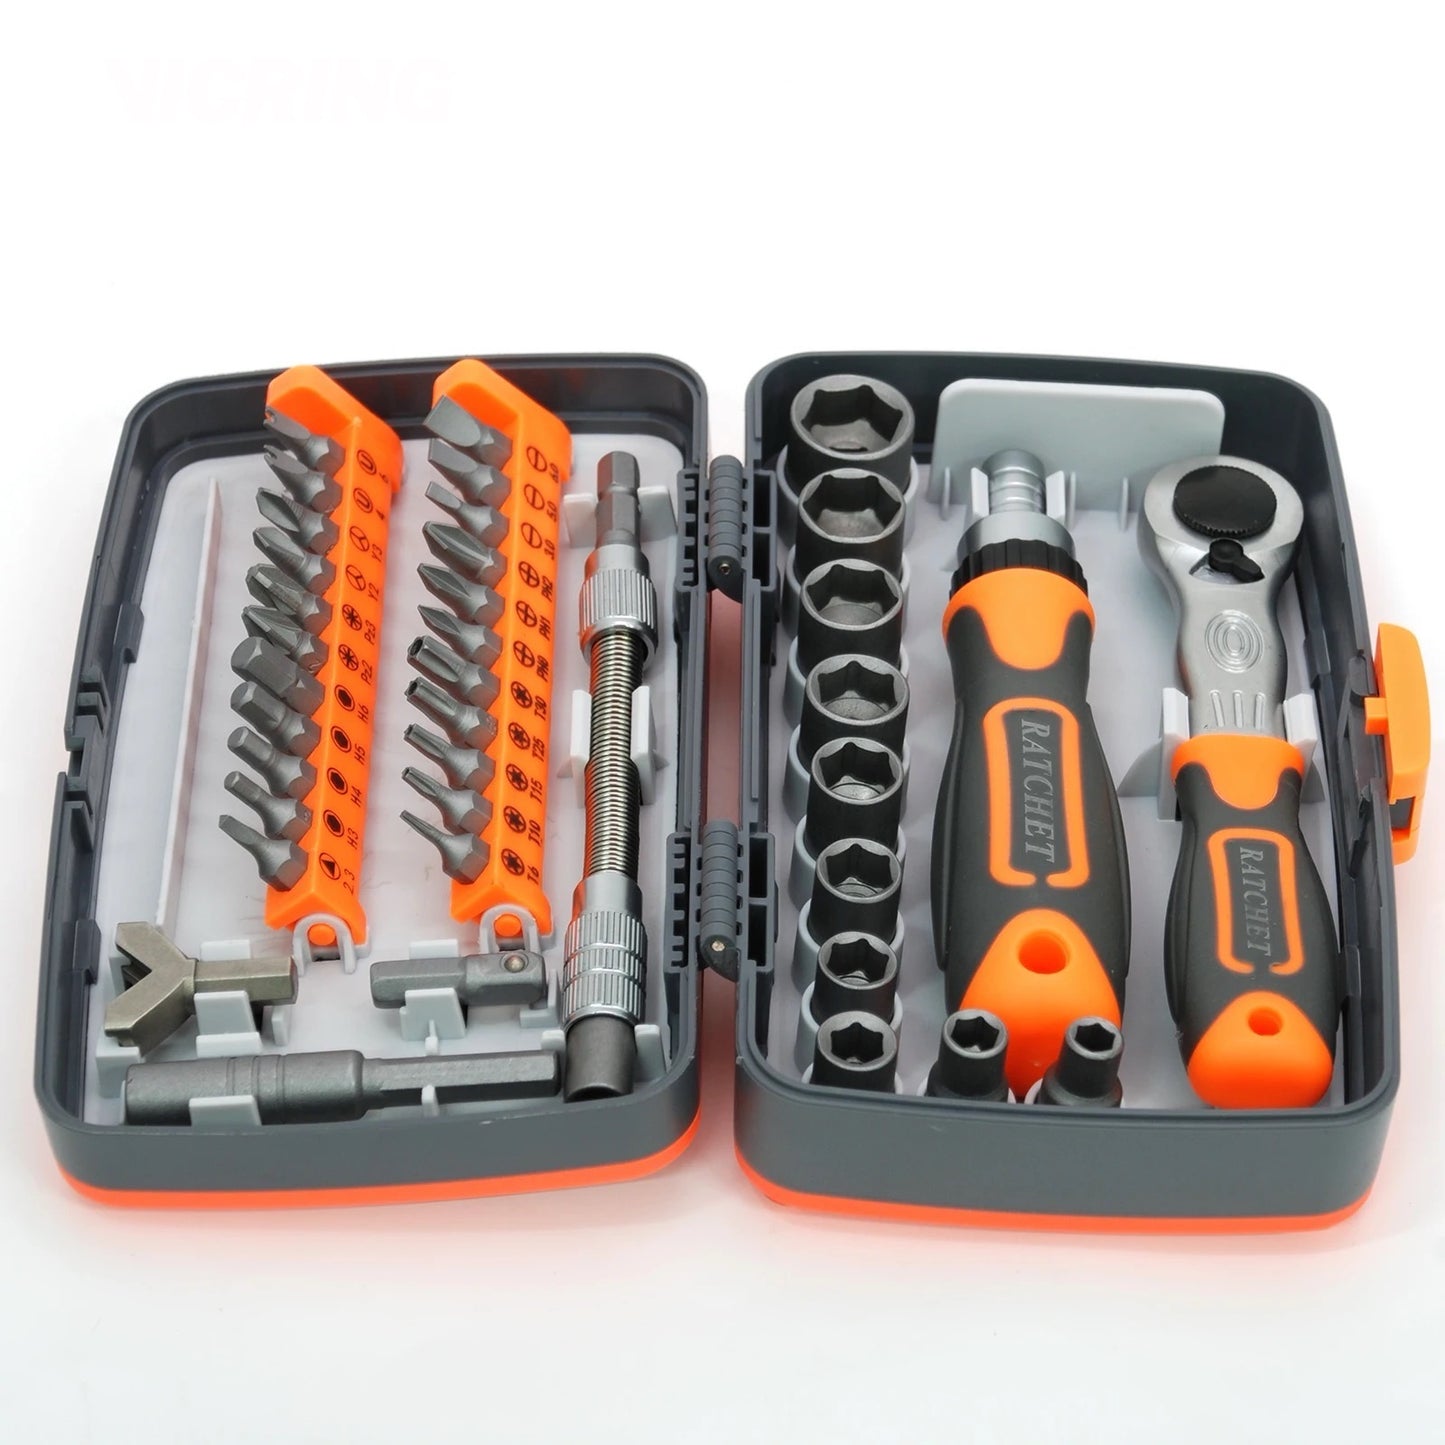 38 Piece 3/8 Ratchet Set, Drive Screwdriver and Socket Wrench with Case